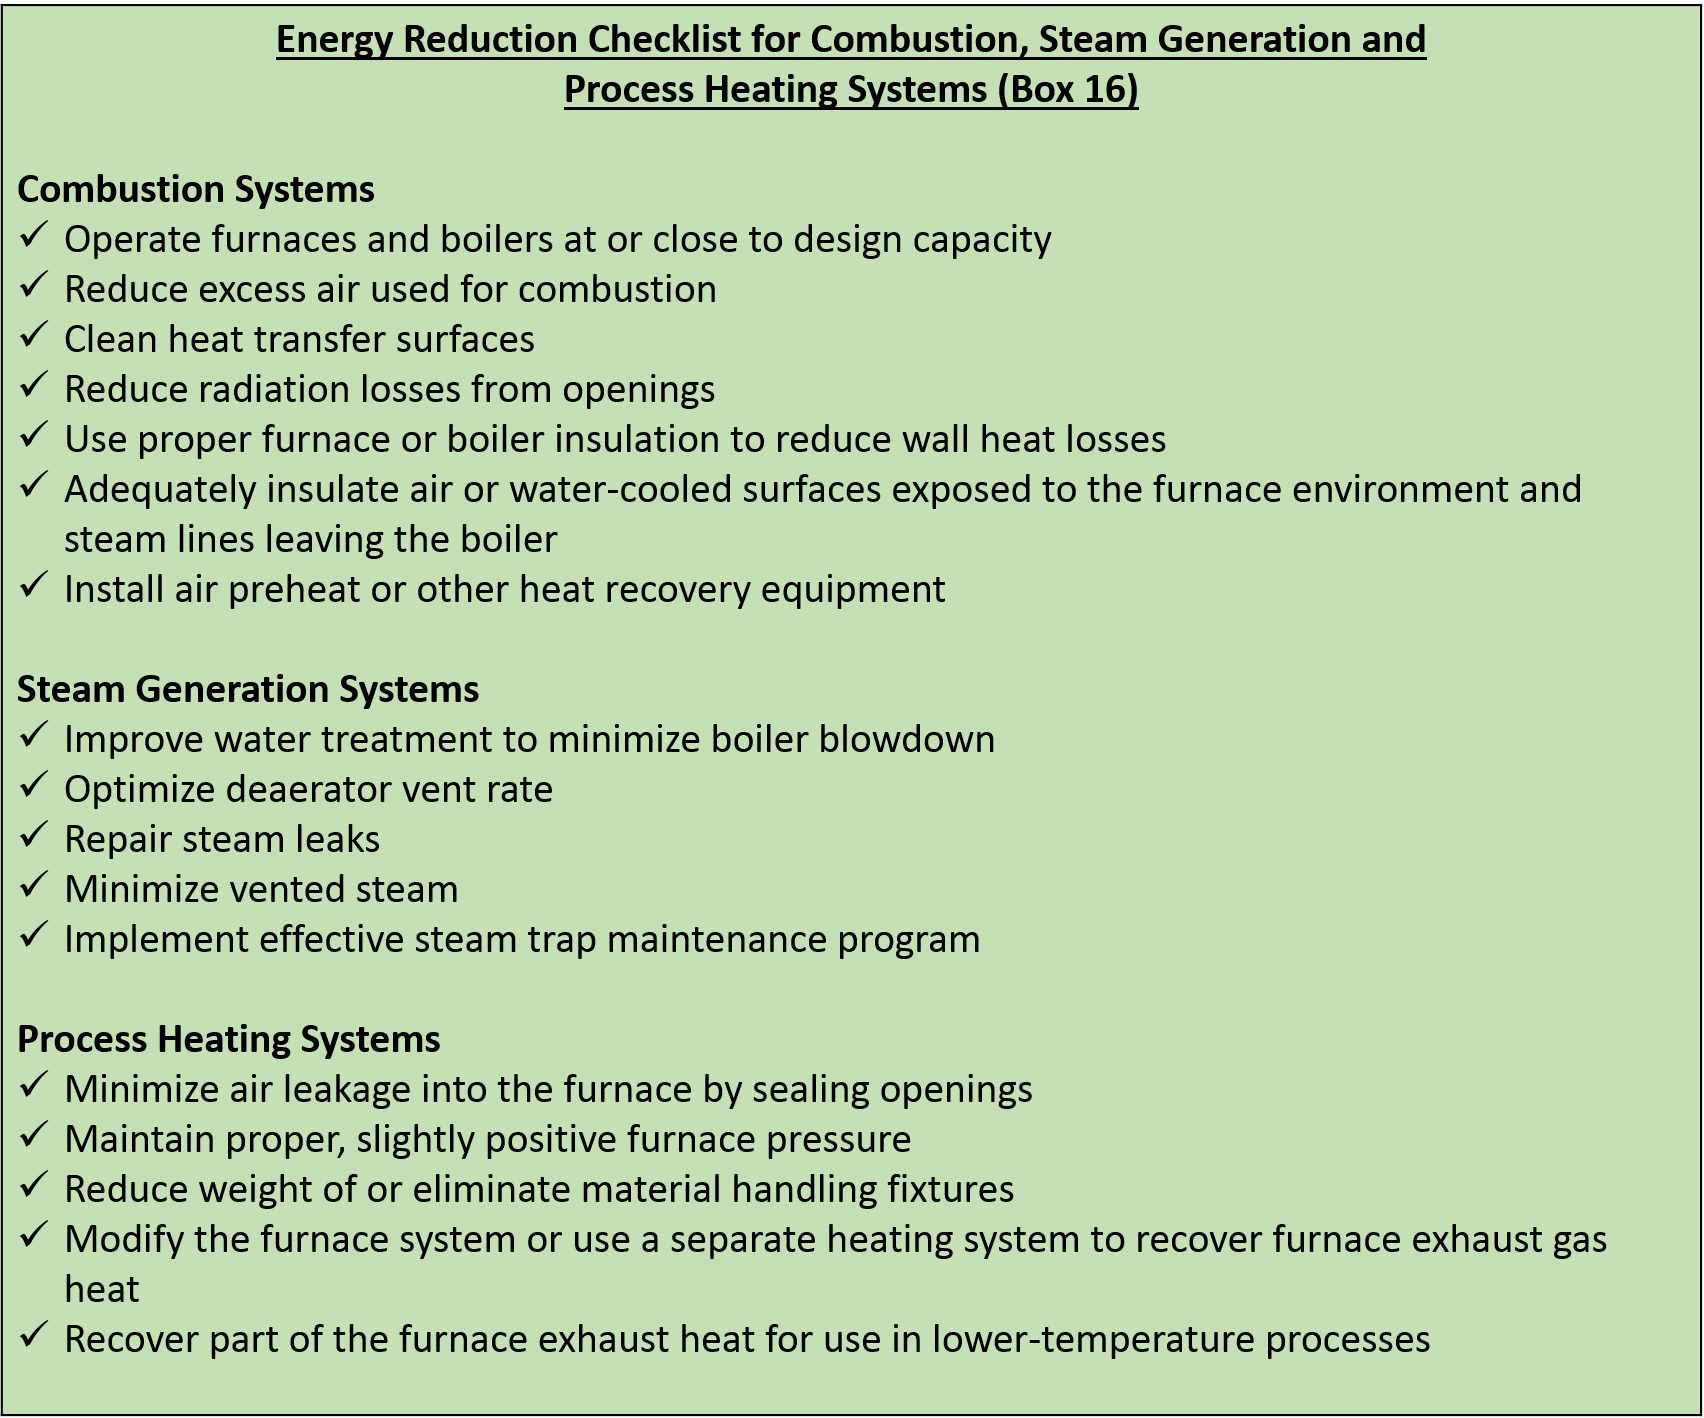 Energy Reduction Checklist for Combustion, Steam Generation and Process Heating Systems (Box 16) 